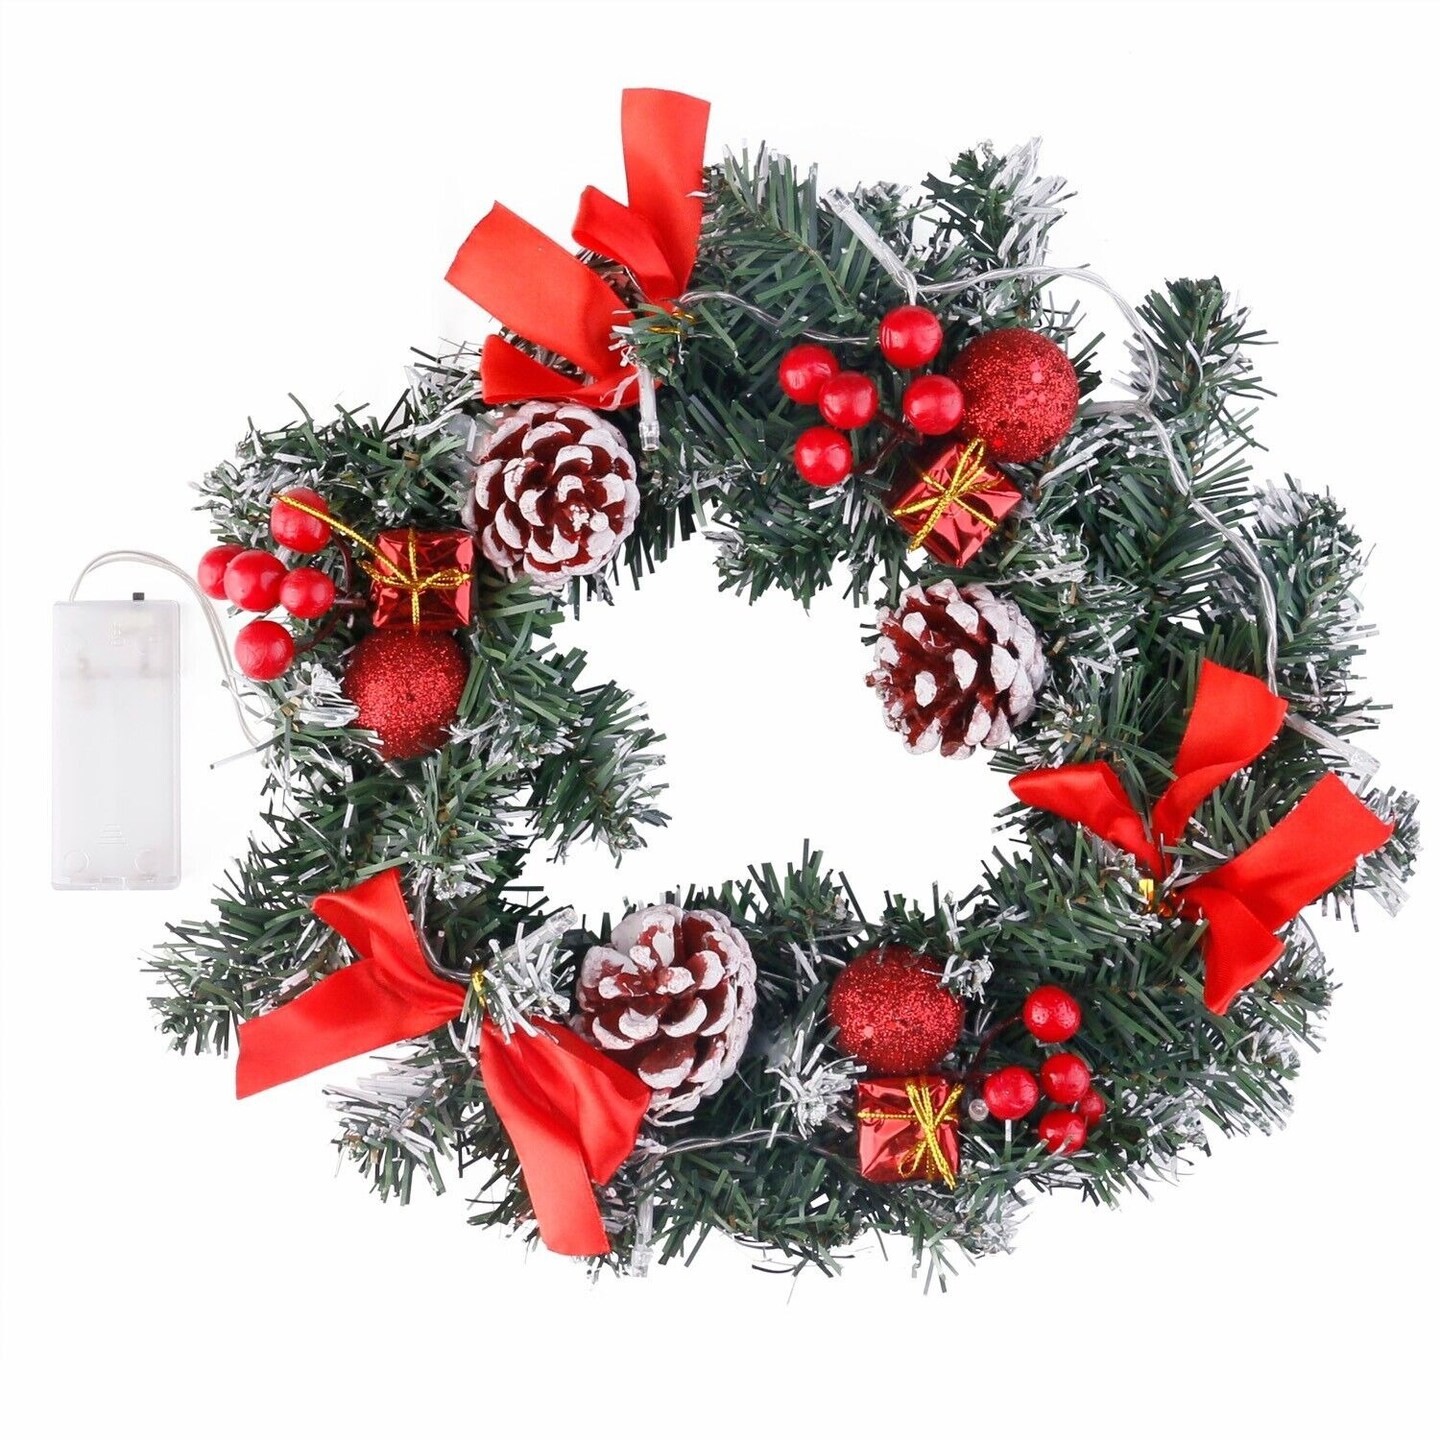 HOT* Michaels Christmas Decor Deals: Wreath and Wrapping Supplies